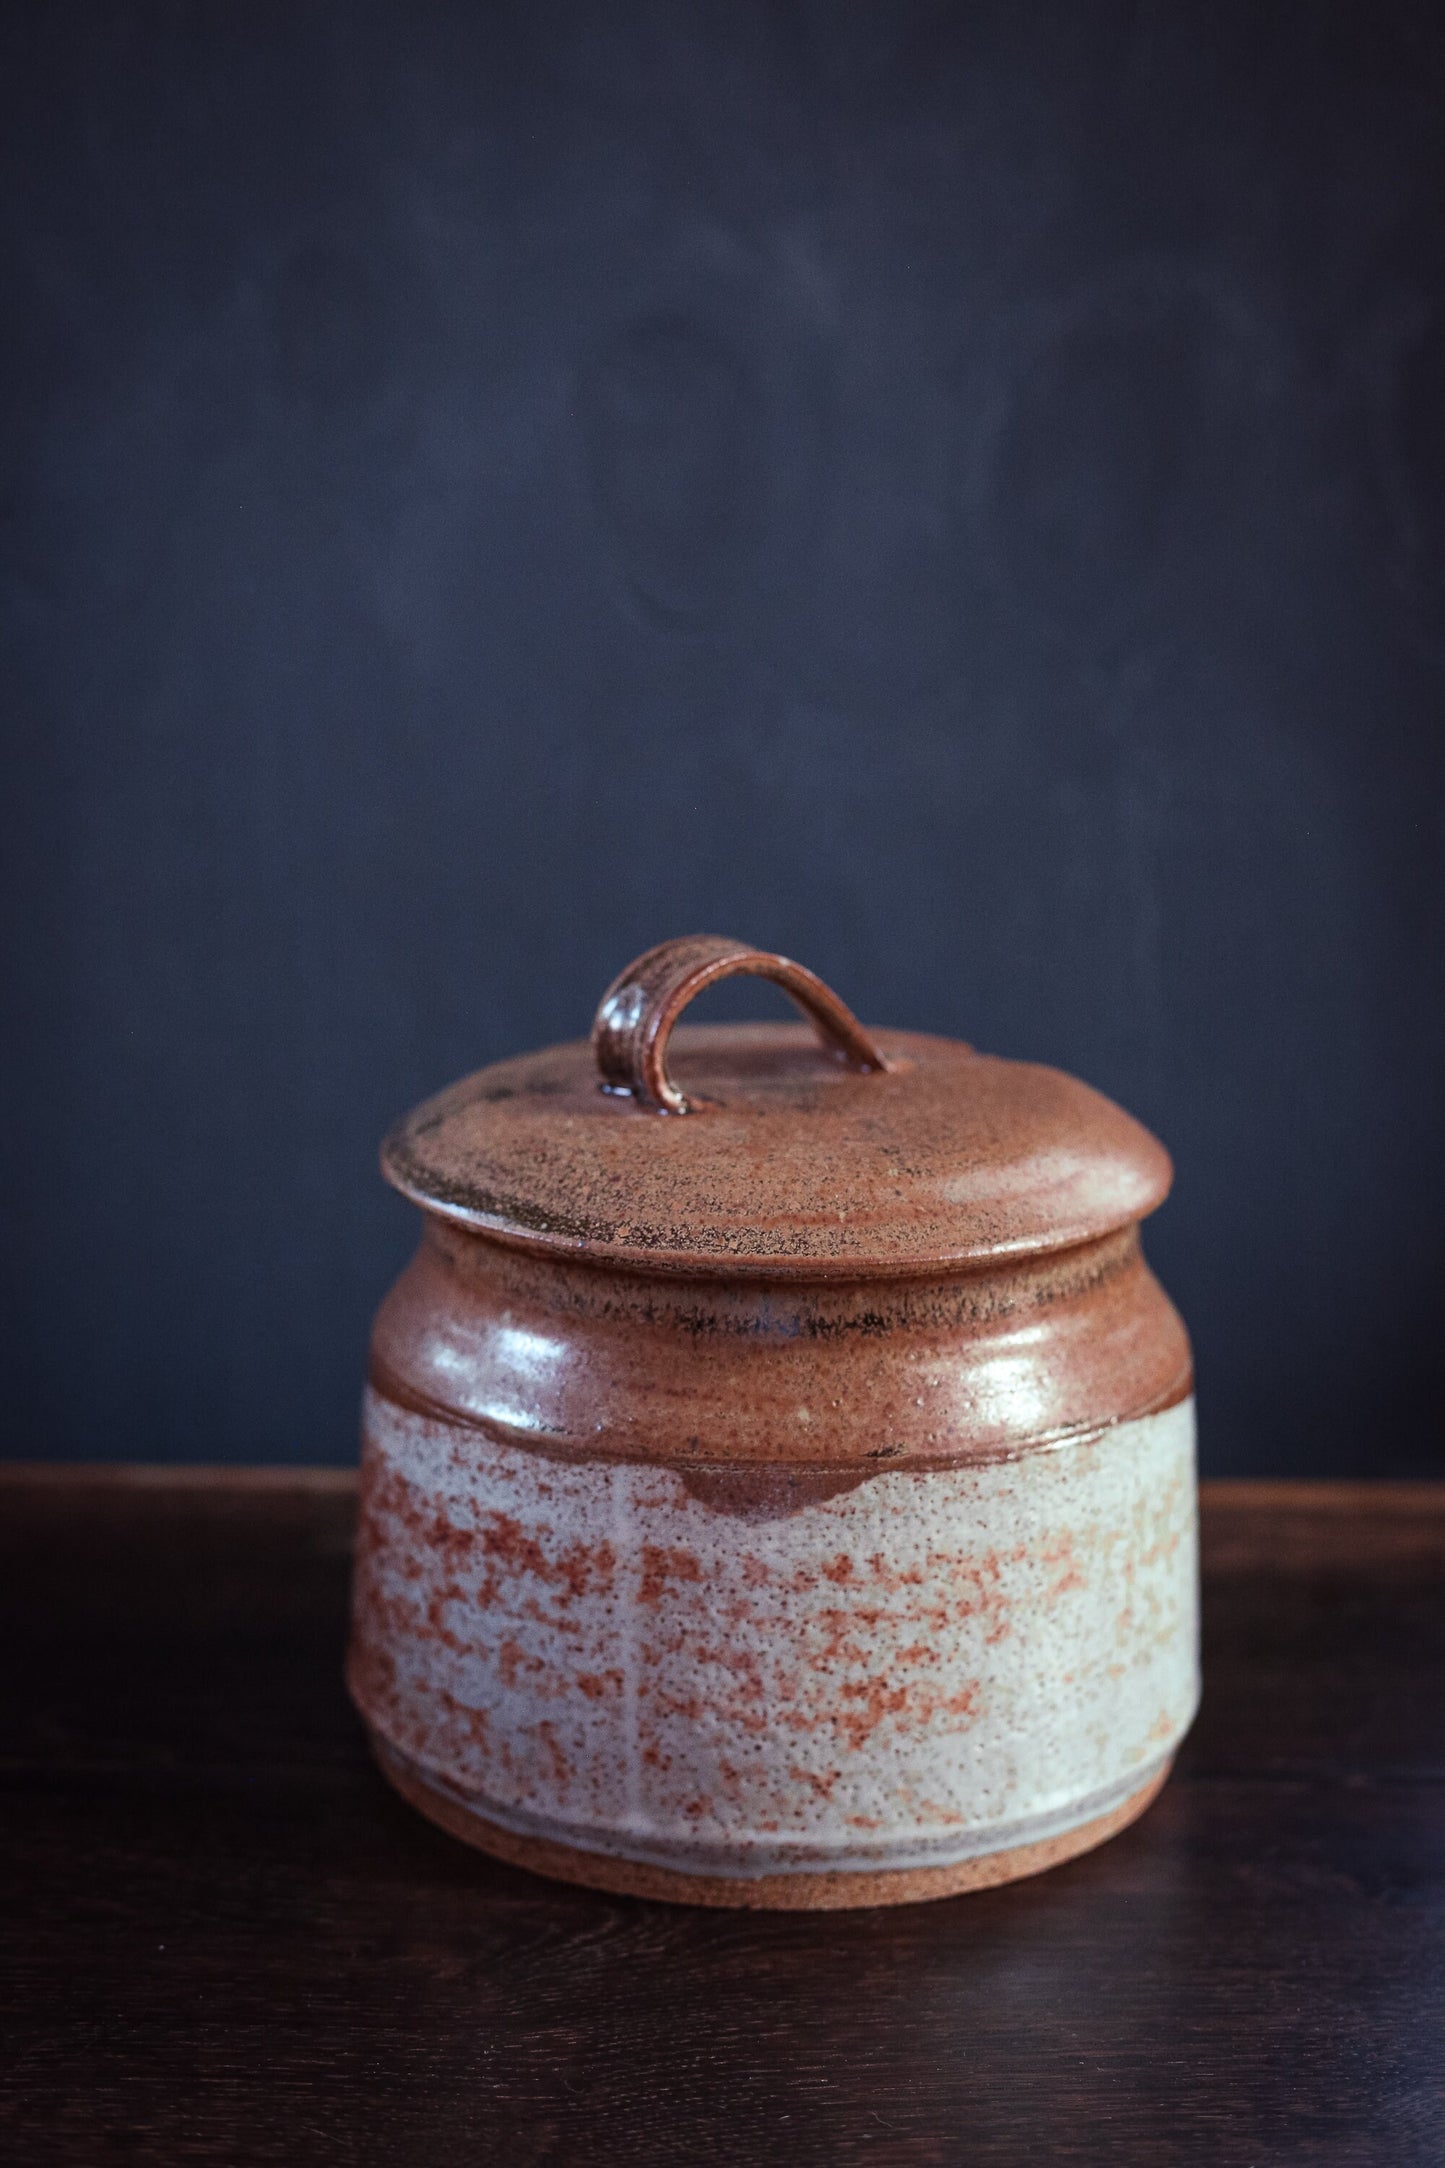 Hand Thrown Lidded Ceramic Canister with Spoon Opening - Vintage Signed Boch Studio Pottery Speckled Rust & Earth Tone Glaze